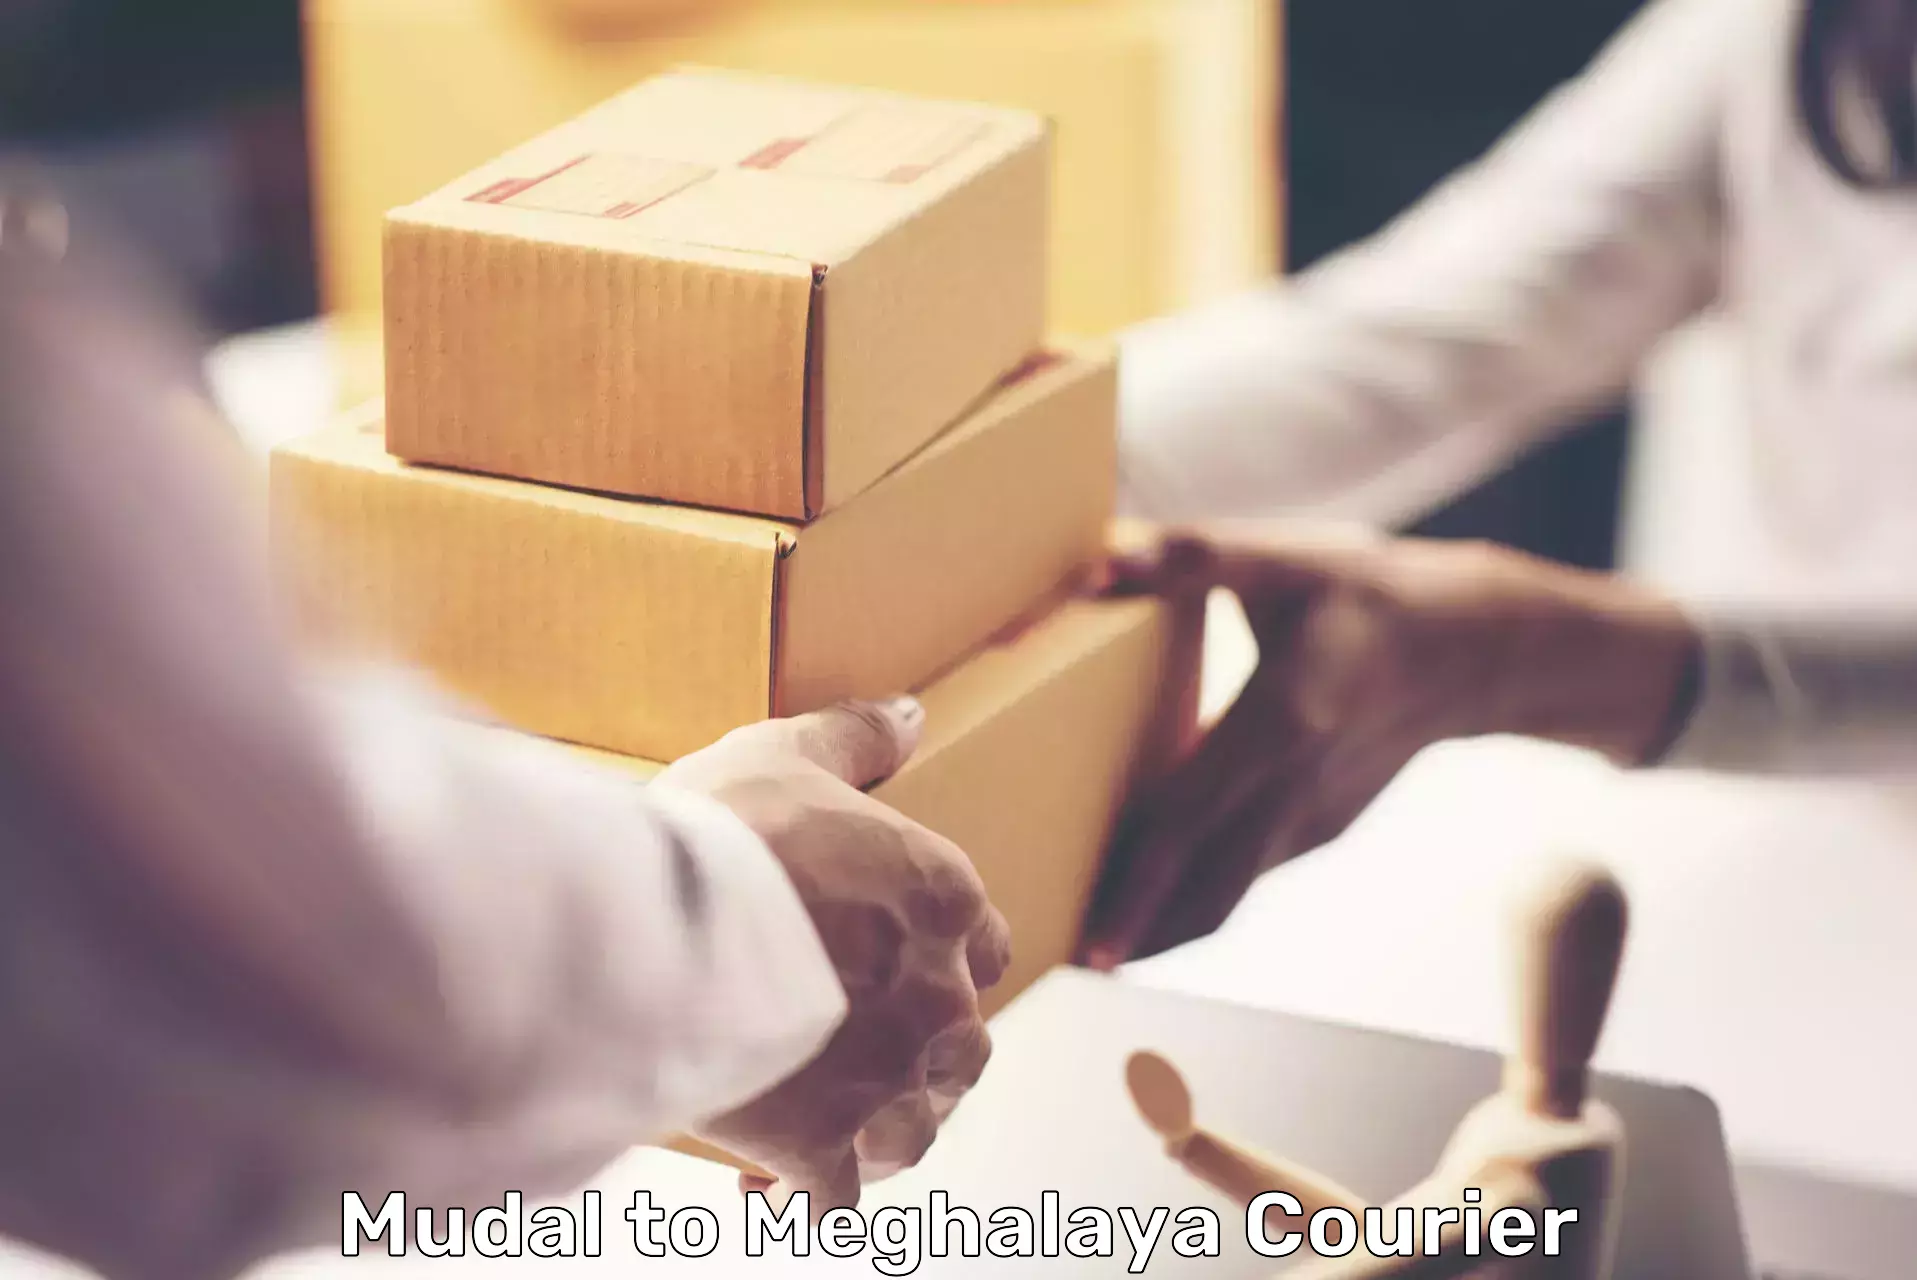 Smart shipping technology Mudal to Dkhiah West